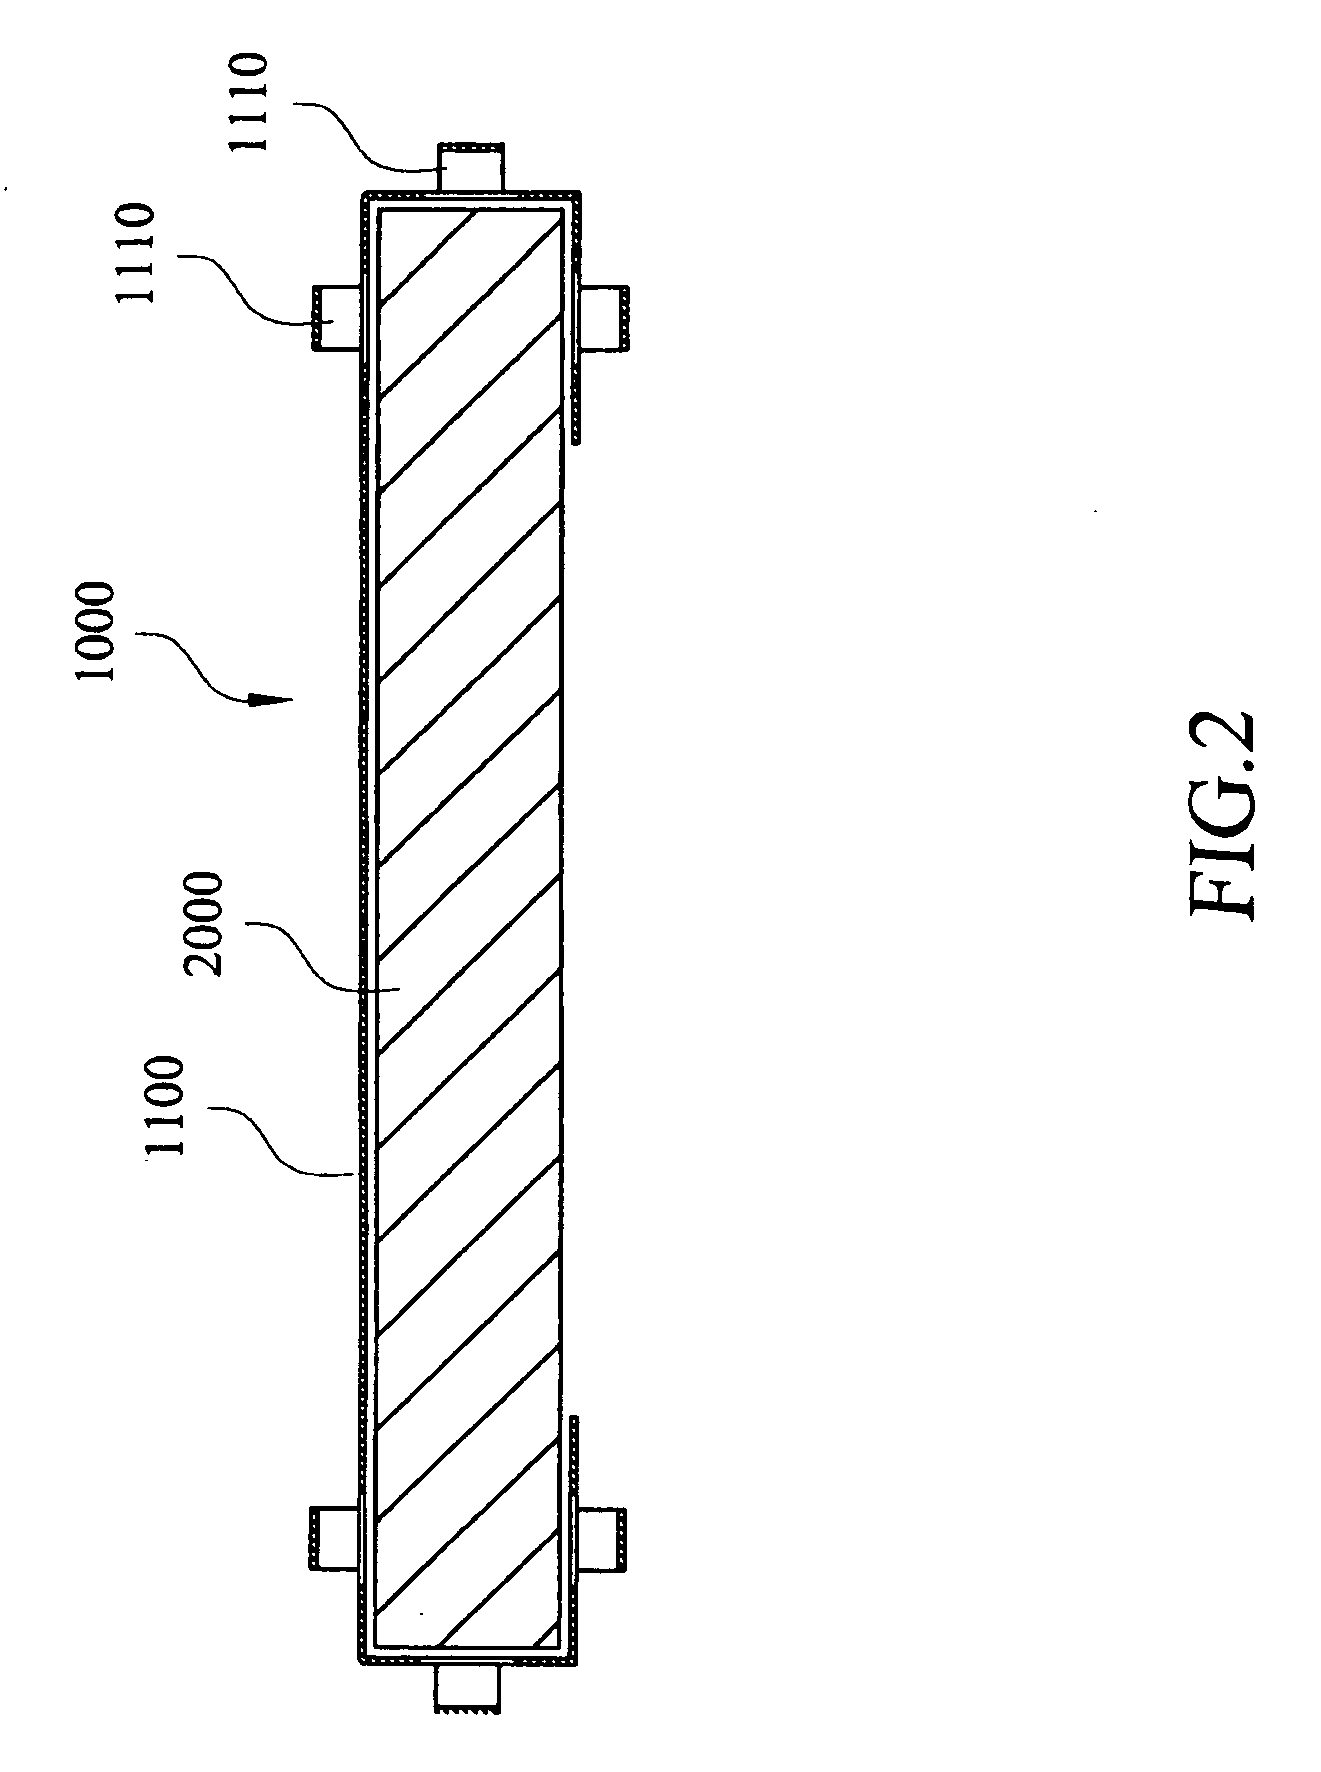 Anti-vibration and anti-electromagnetic-interfering frame for hard disk